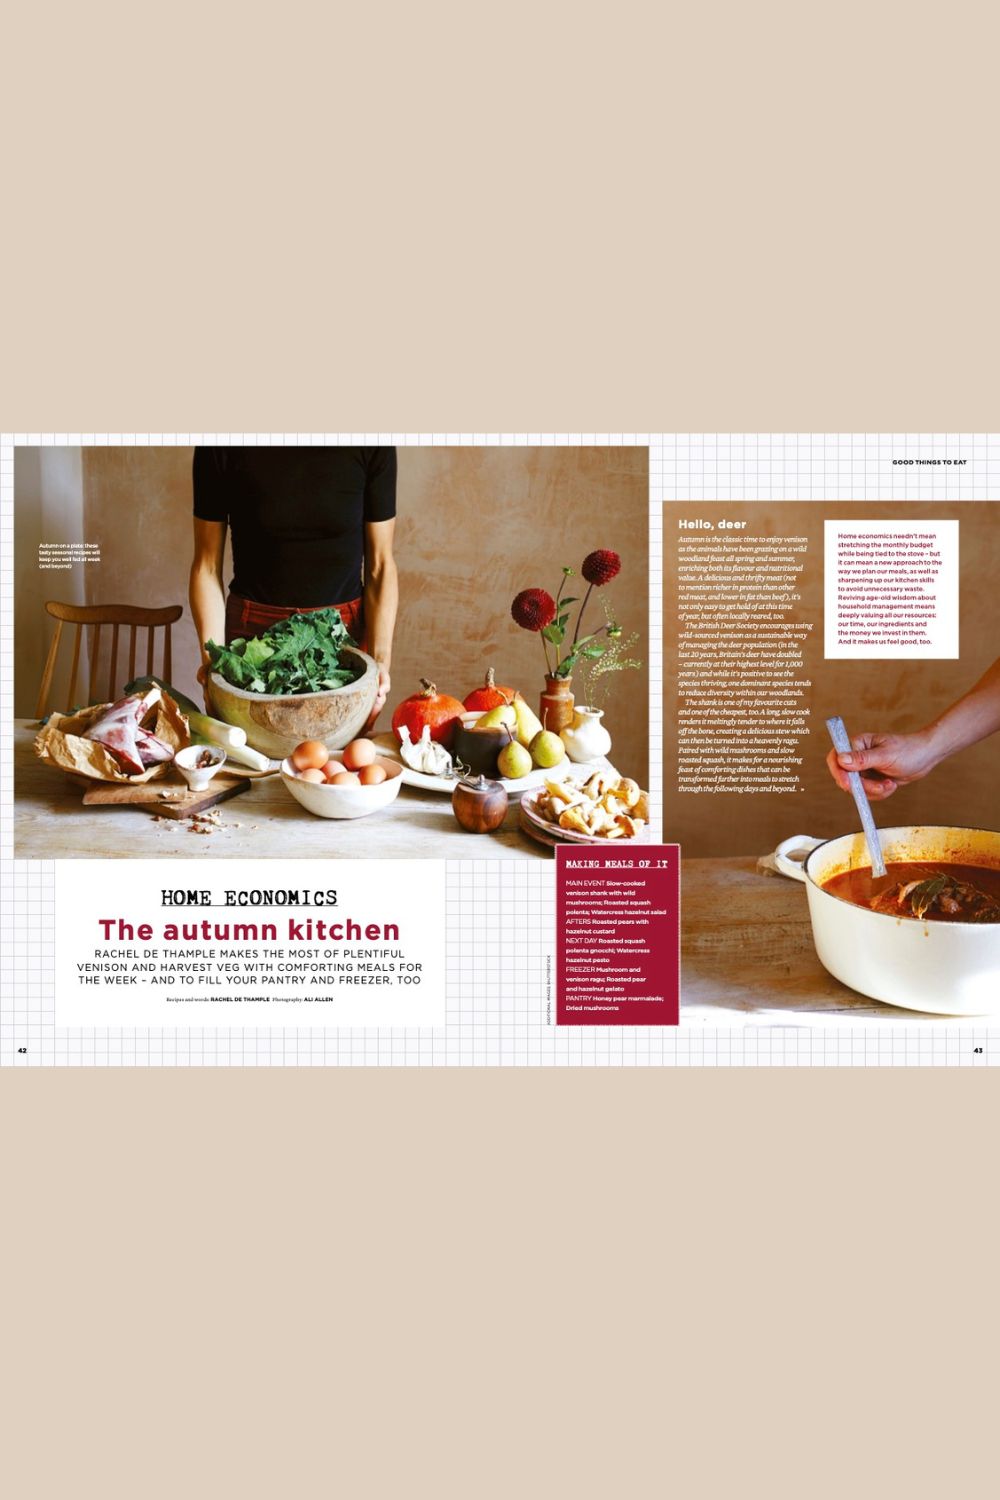 The Simple Things Issue 136 October